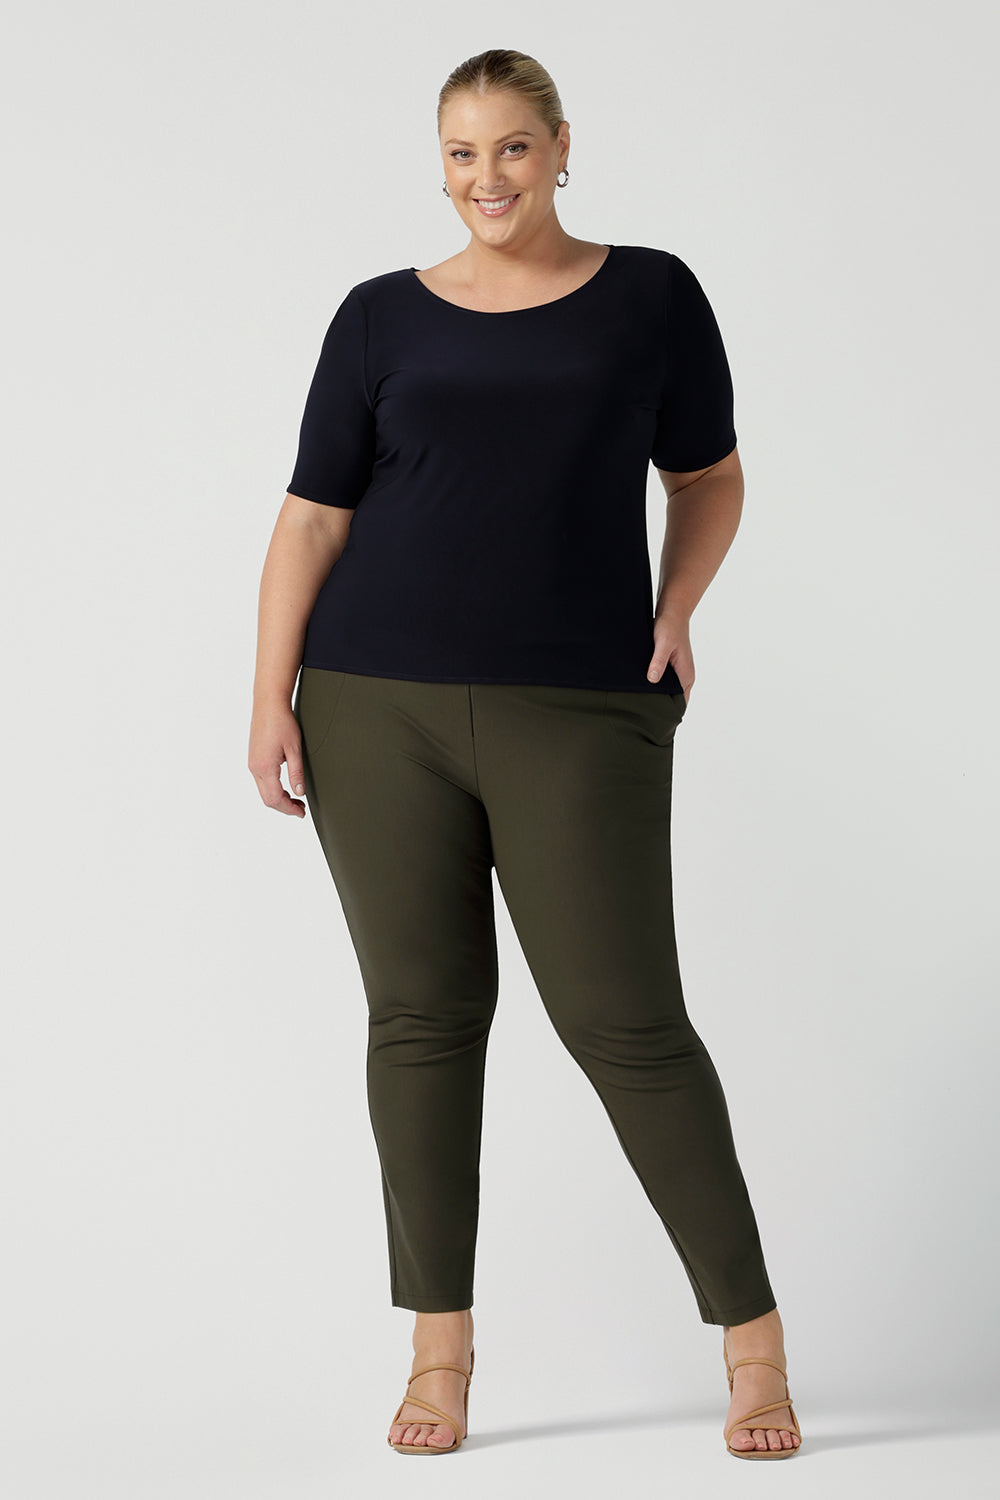 A good top for plus size, curvy women, this short sleeve, boat neck top in navy blue is worn with slim leg tailored pants in olive green ponte fabric. Shown on a size 18 woman, this is a quality top for workwear. Shop slim fit jersey tops made in Australia by women's clothing brand, Leina & Fleur in their online store now!